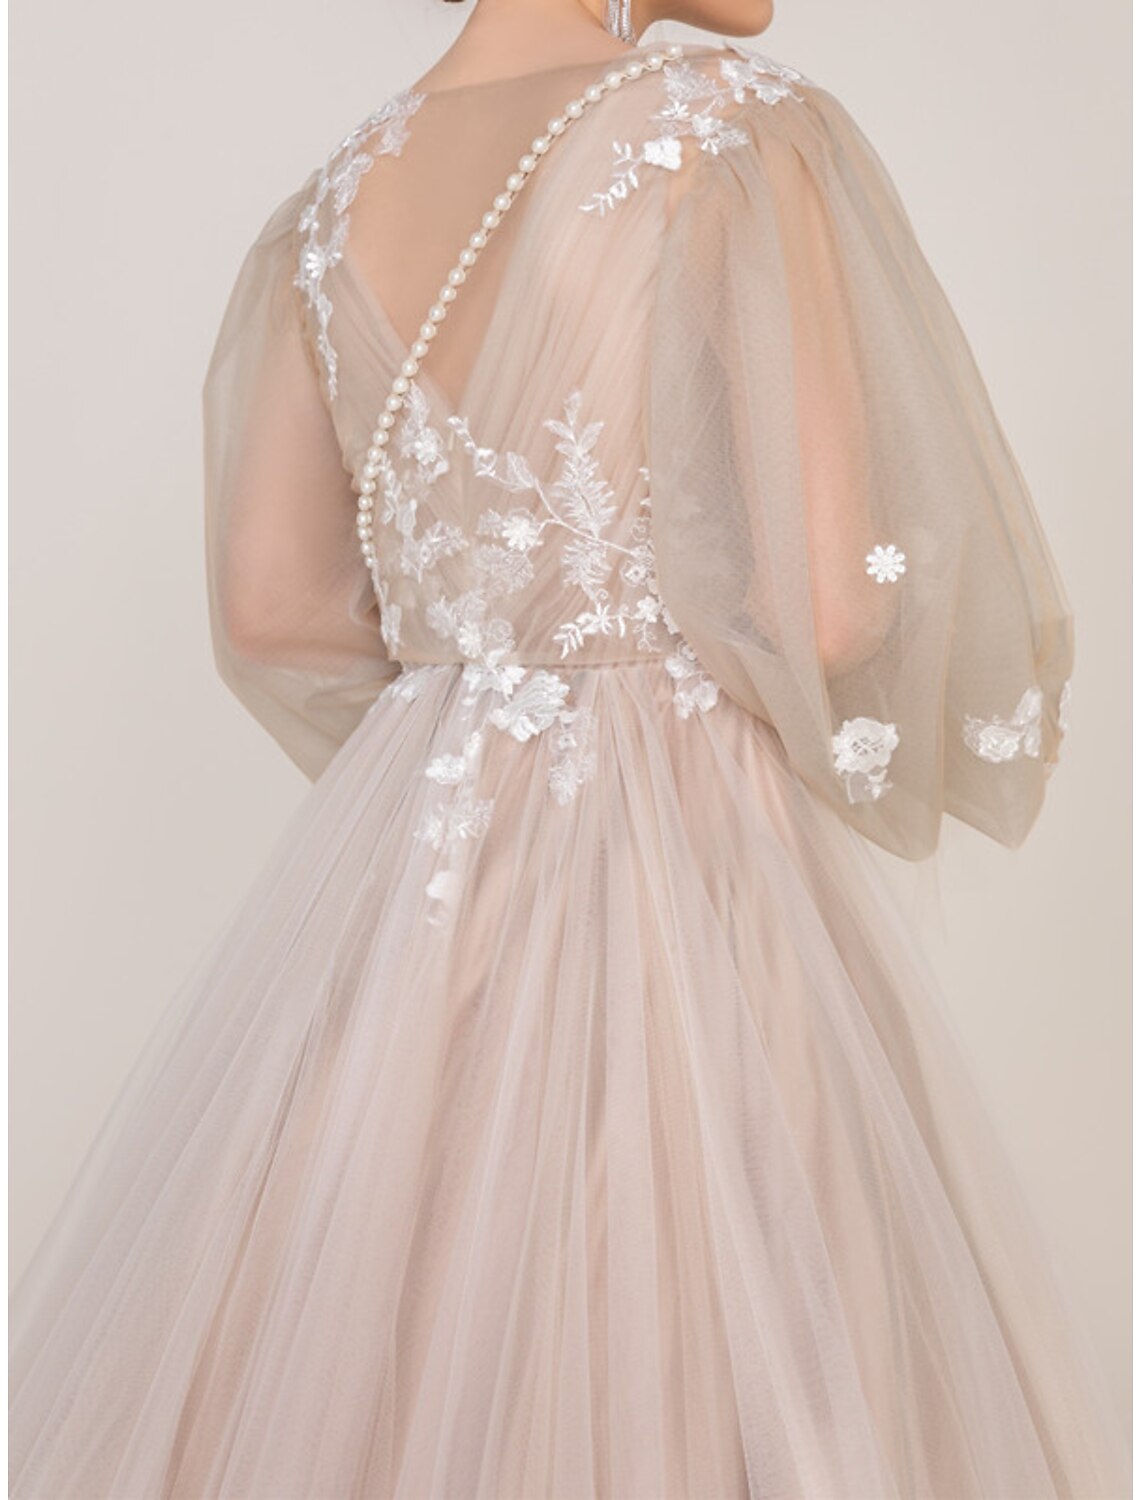 A-Line Floral Princess Prom Dress Jewel Neck Long Sleeve Court Train Tulle with Pleats Appliques